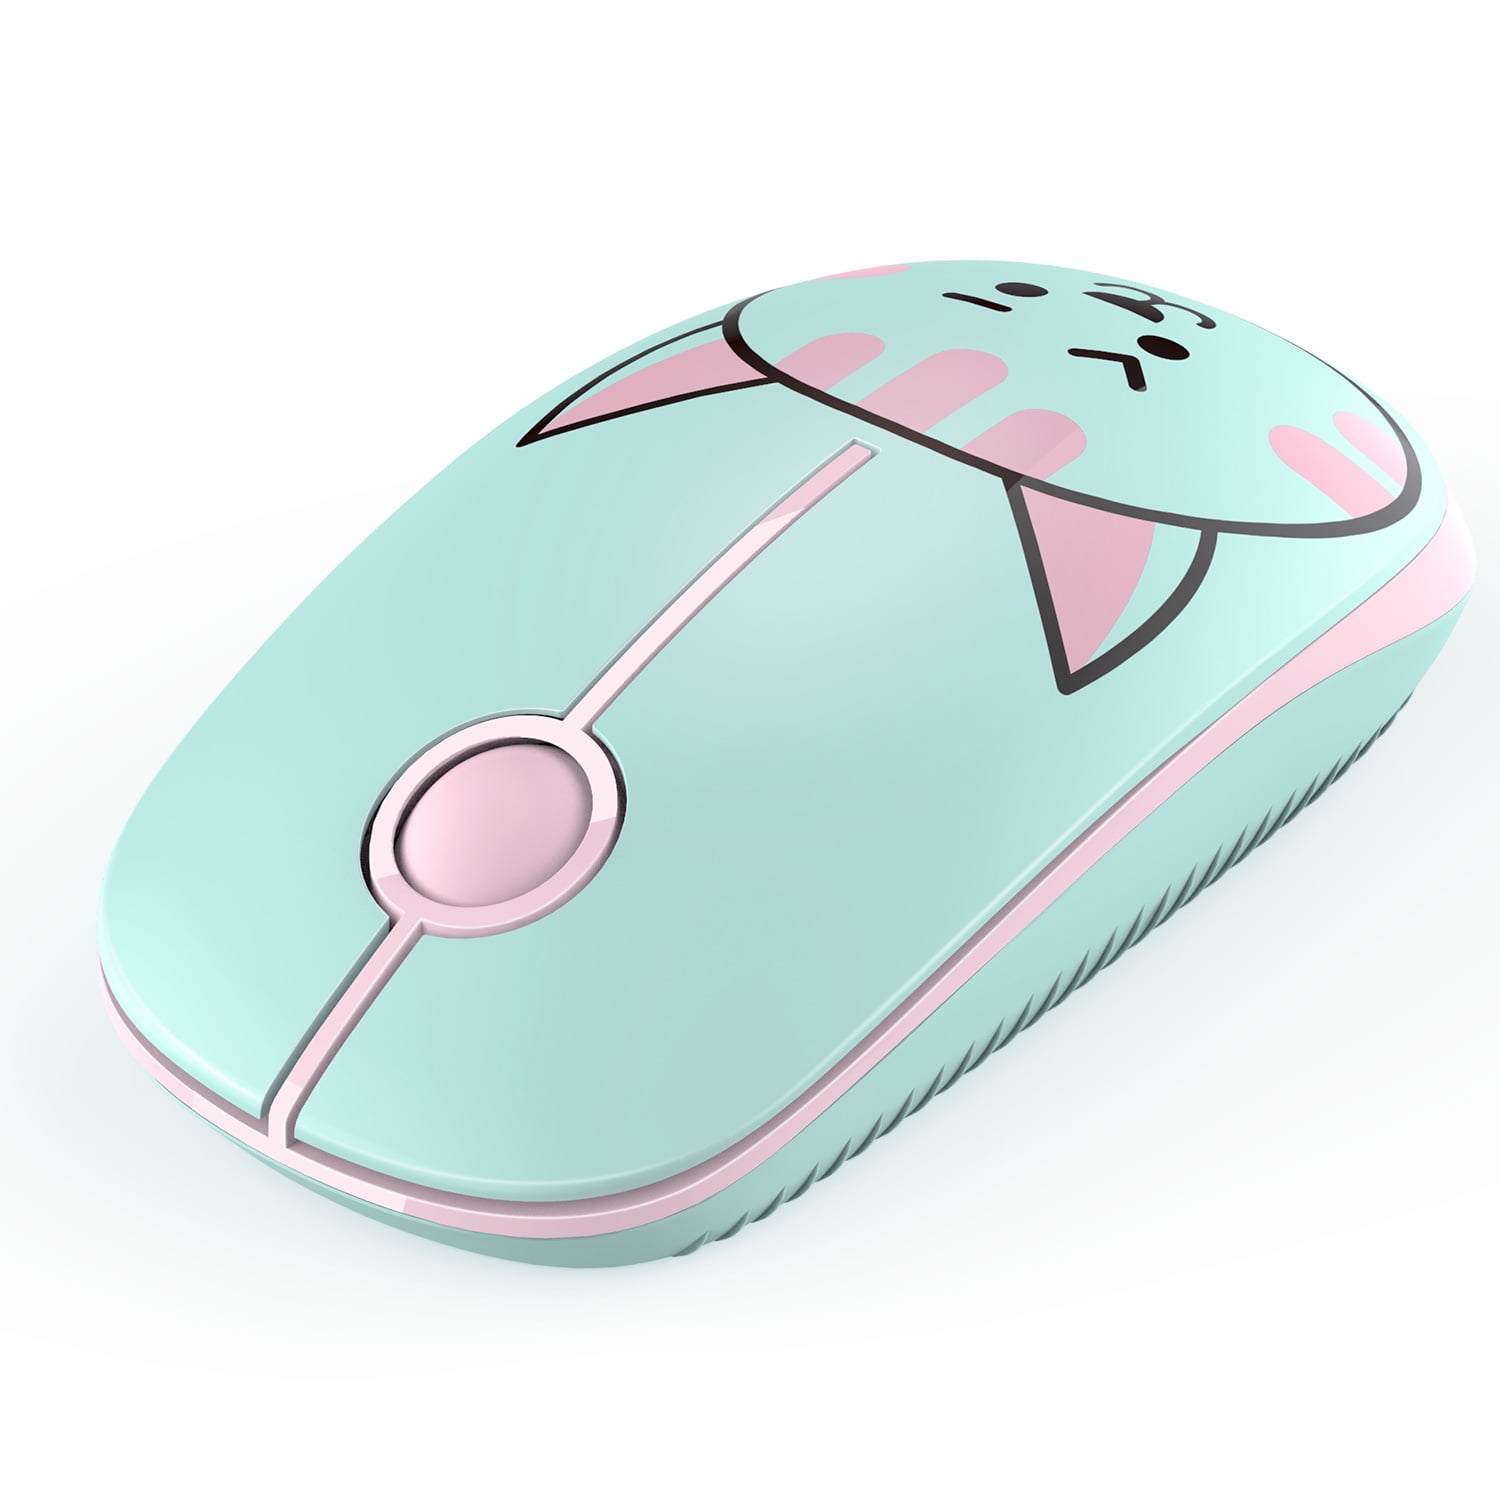 MacBook Less Noise Computer PC Portable Mobile Optical Mice for Notebook Laptop Jelly Comb 2.4G Slim Wireless Mouse with Nano Receiver White and Pink 